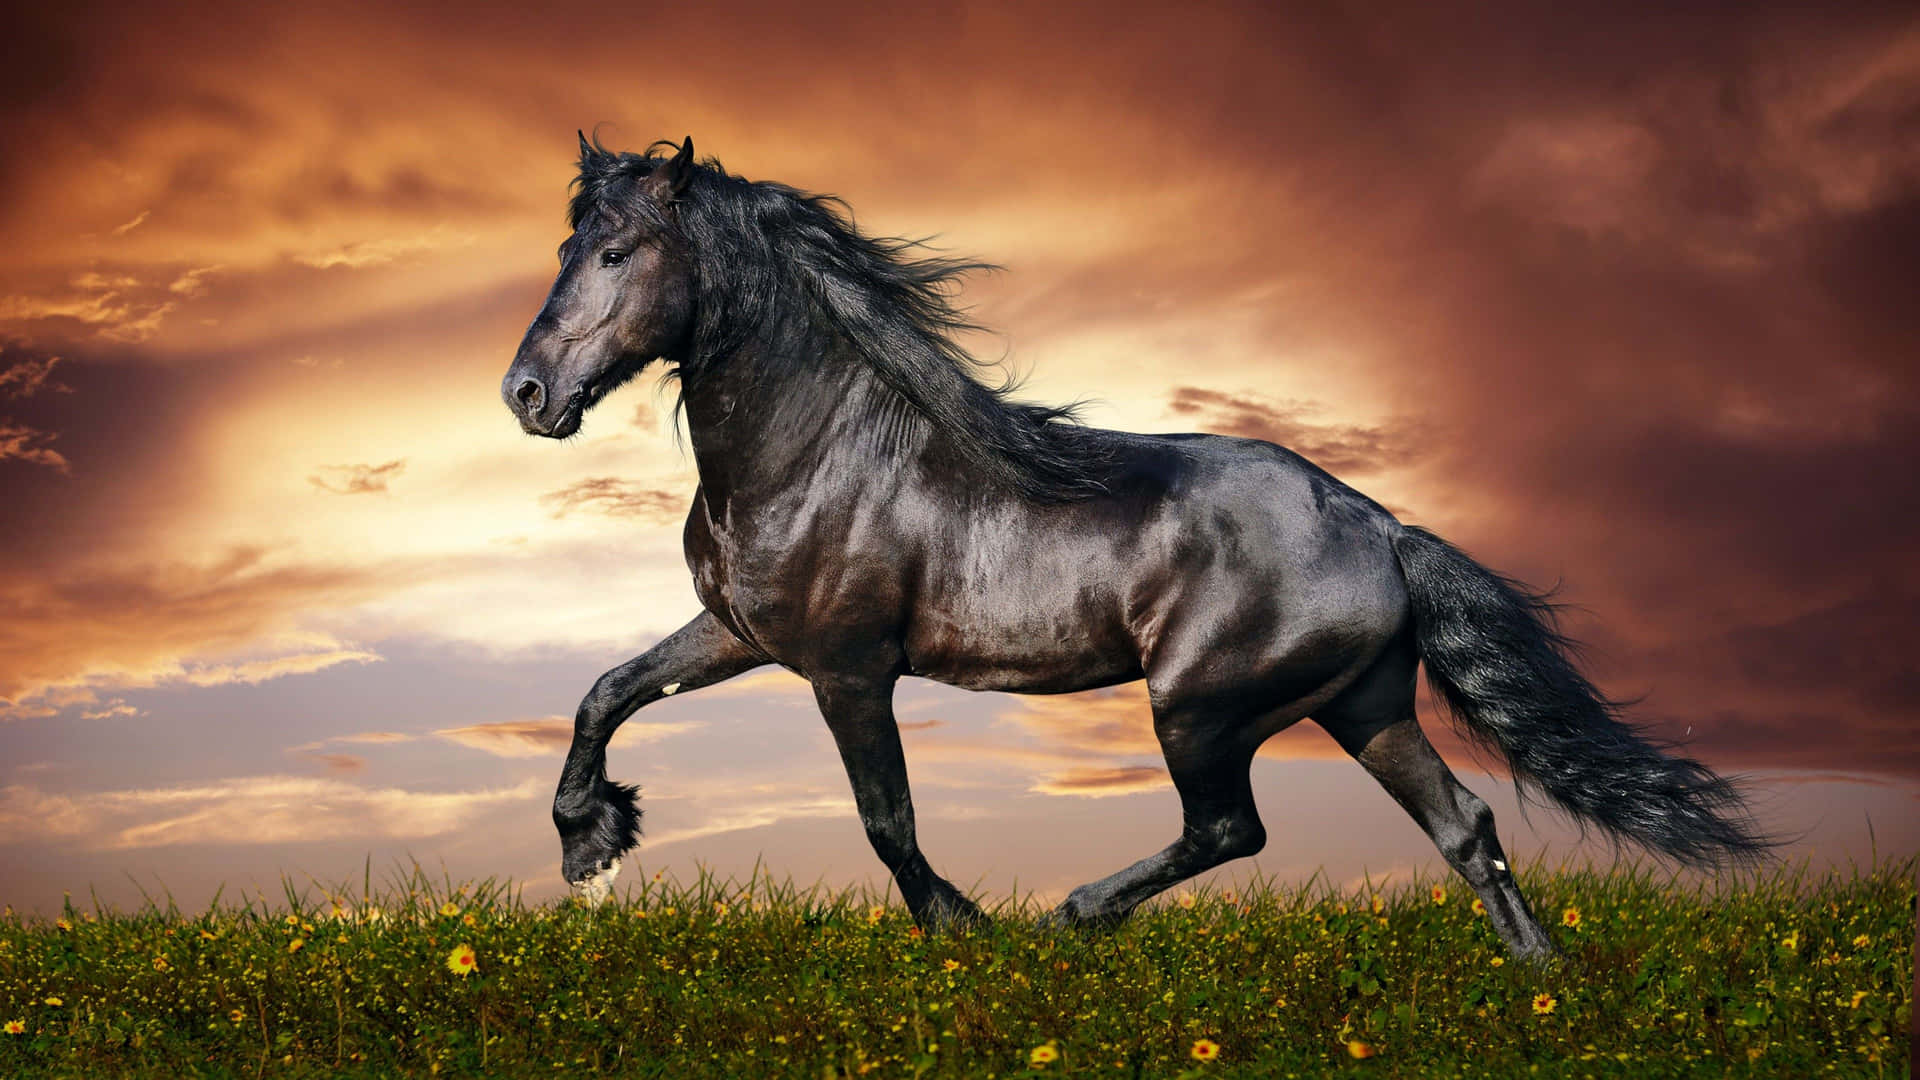 Mustang Horse Black Running Picture